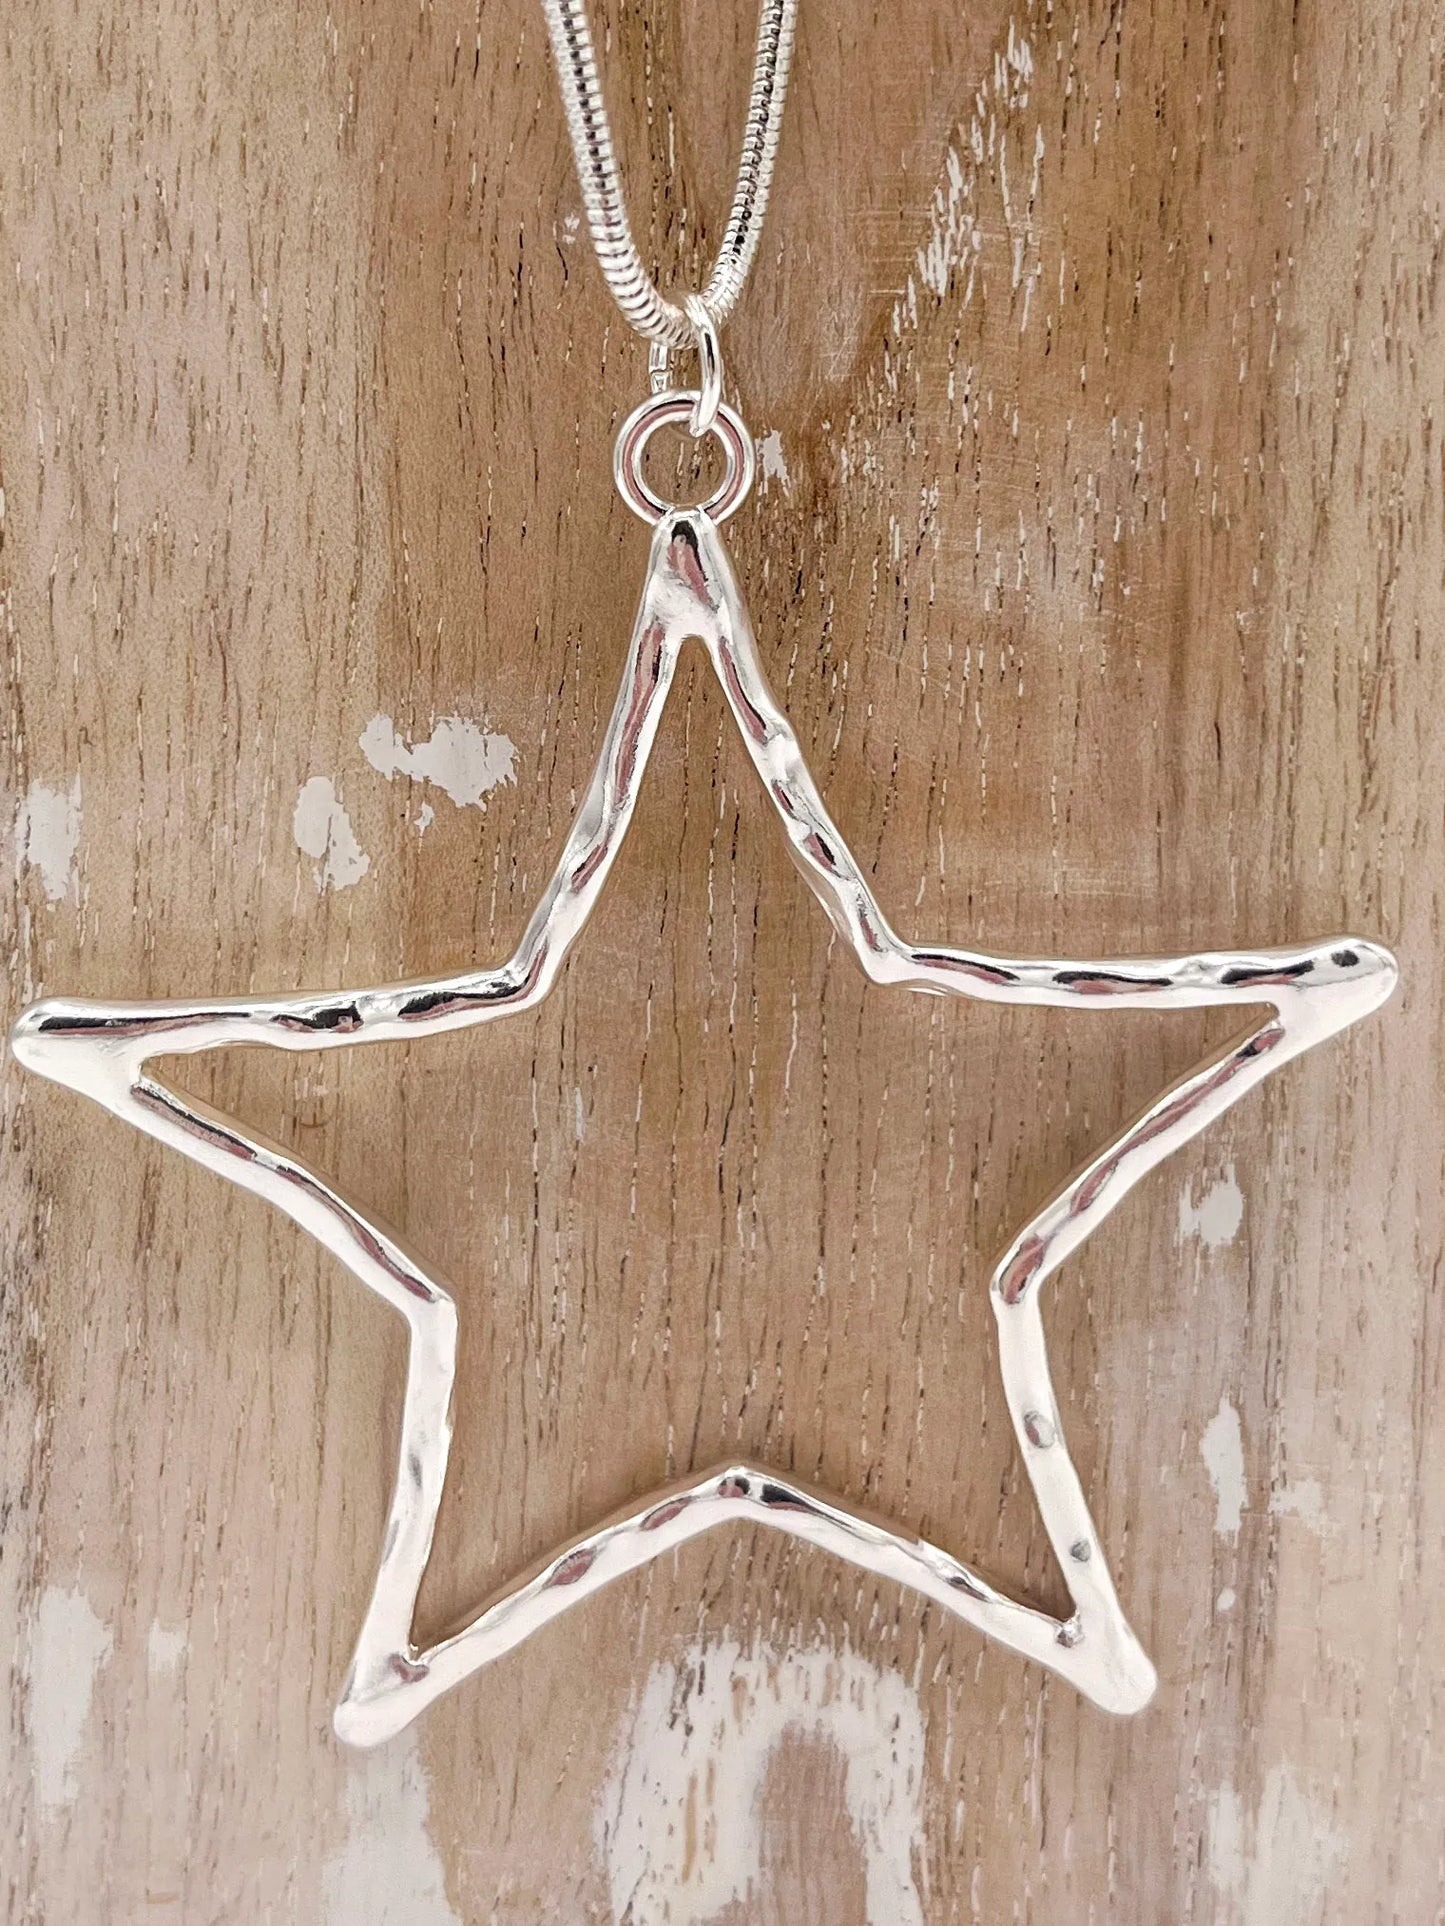 Long Silver Hollow Star Necklace